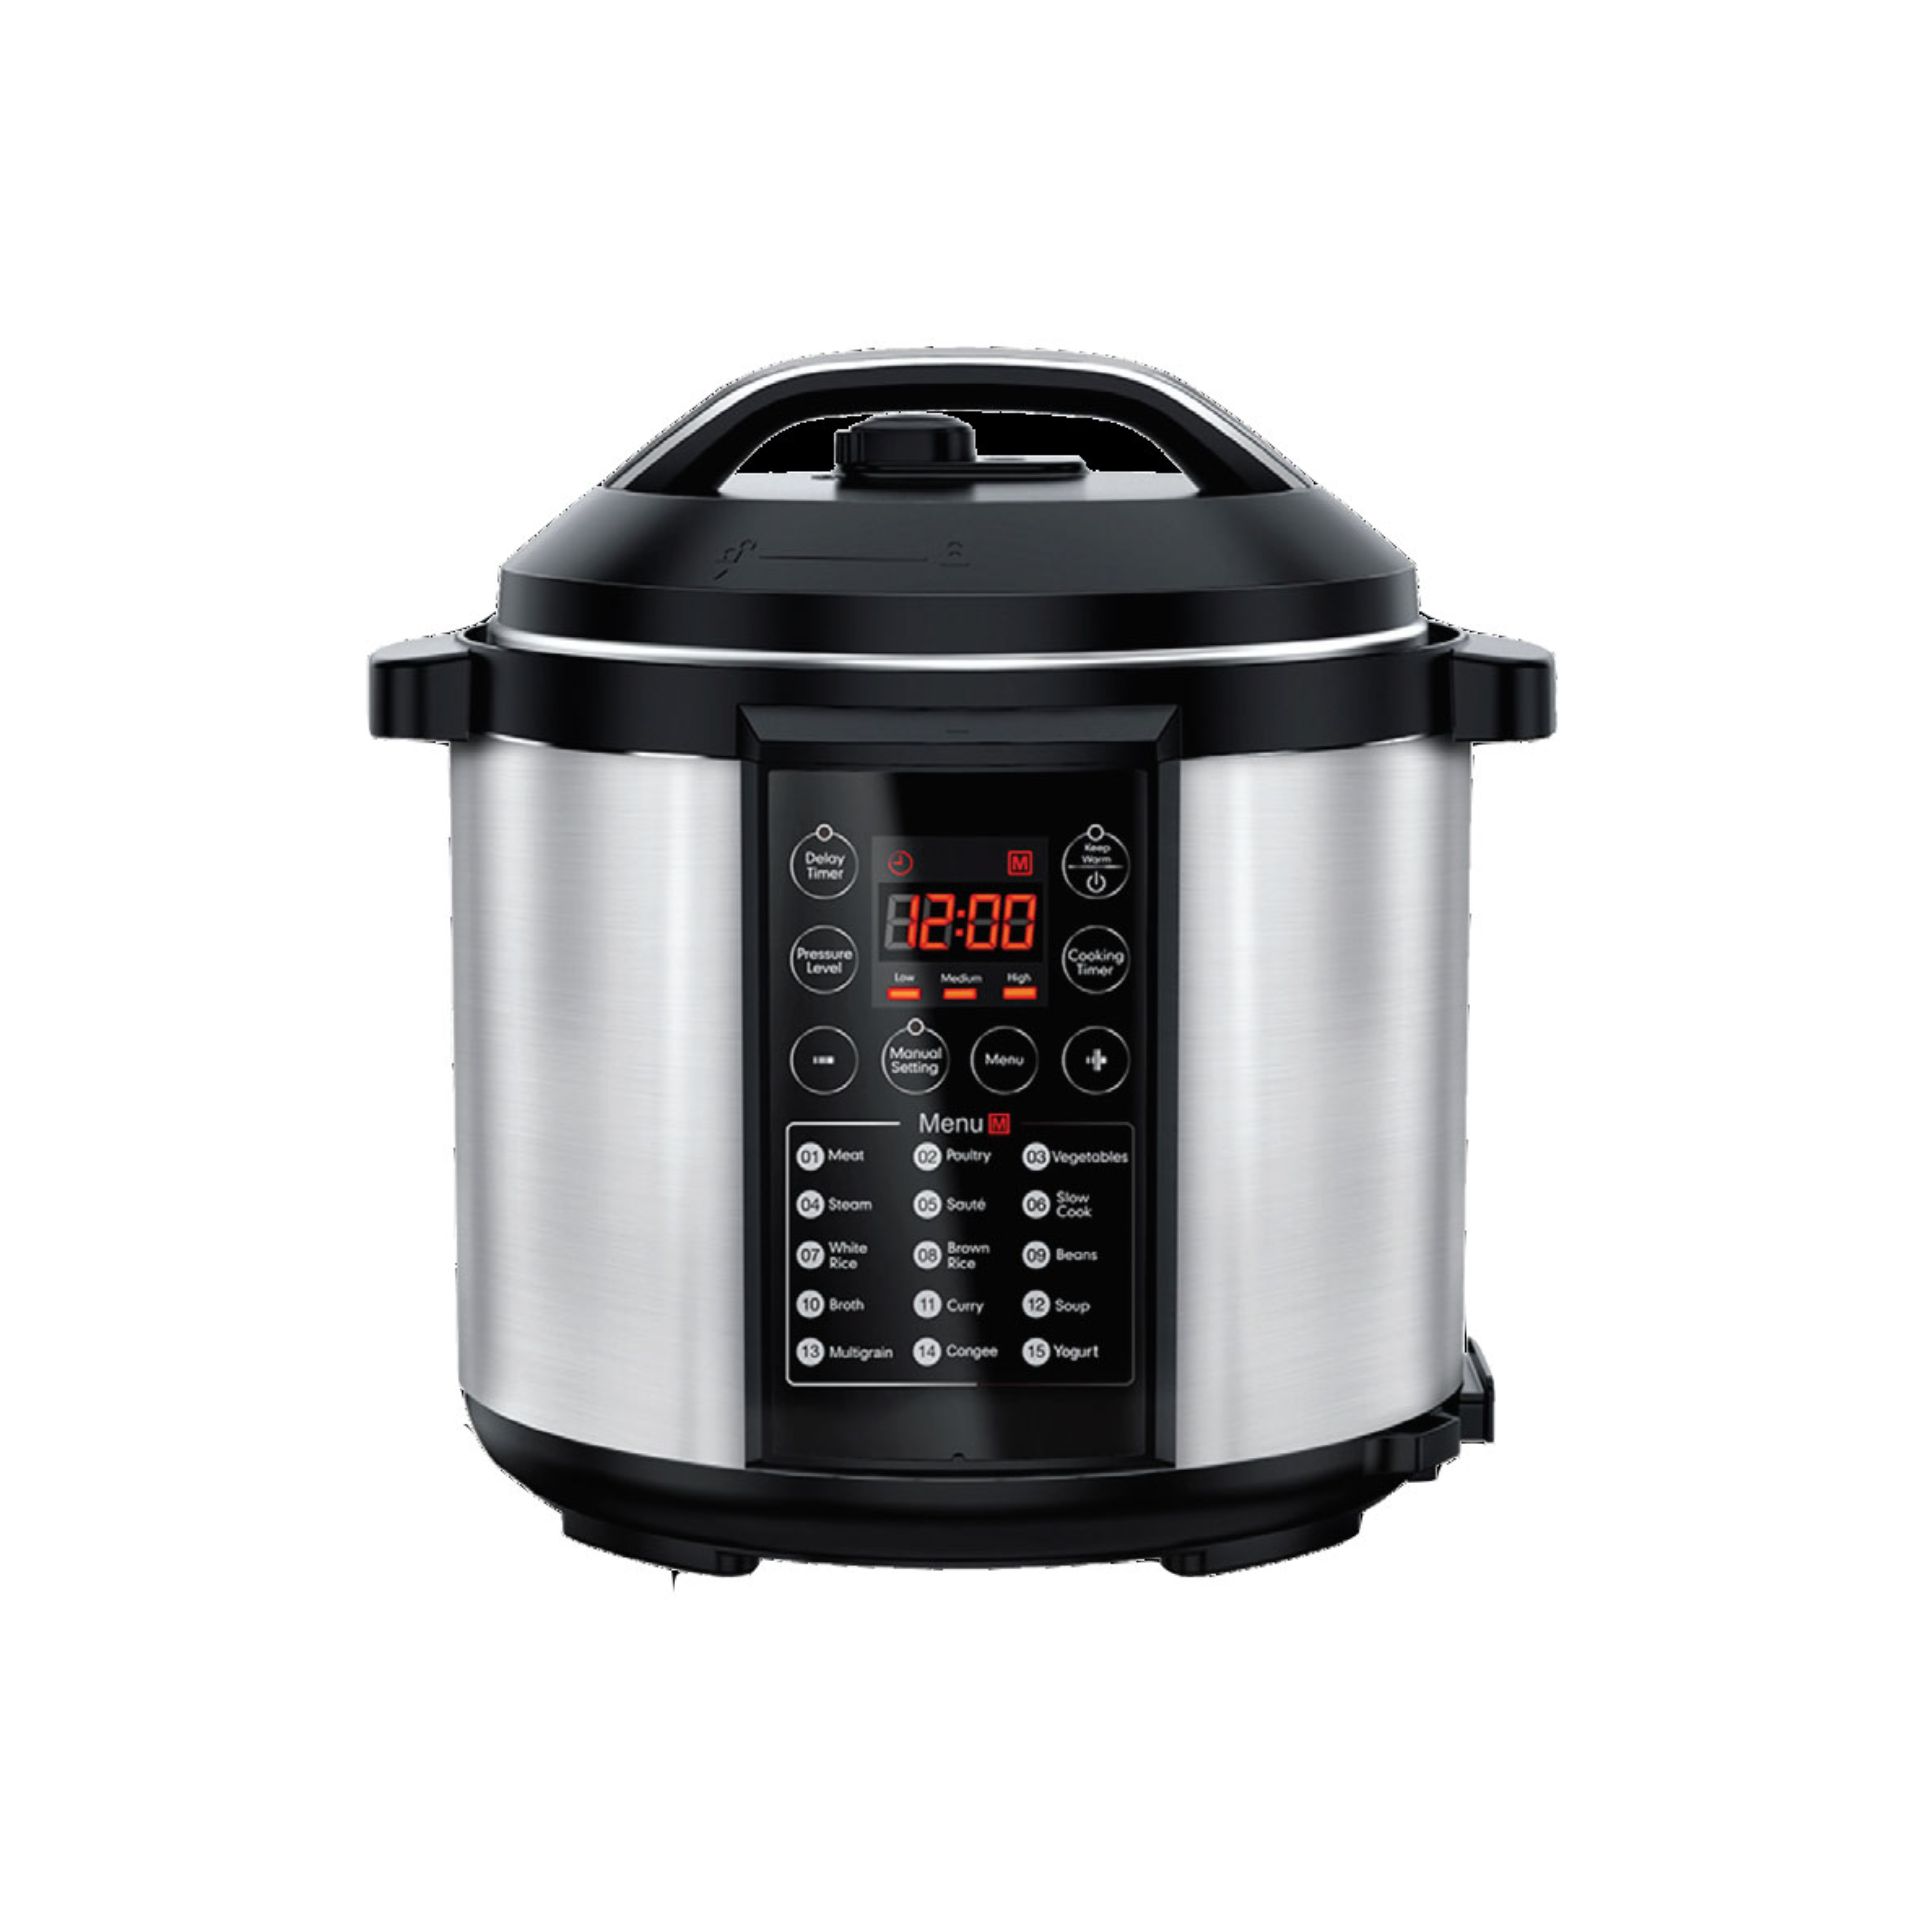 5.7L Pressure Cooker with Stainless Steel Pot MY-D6004B